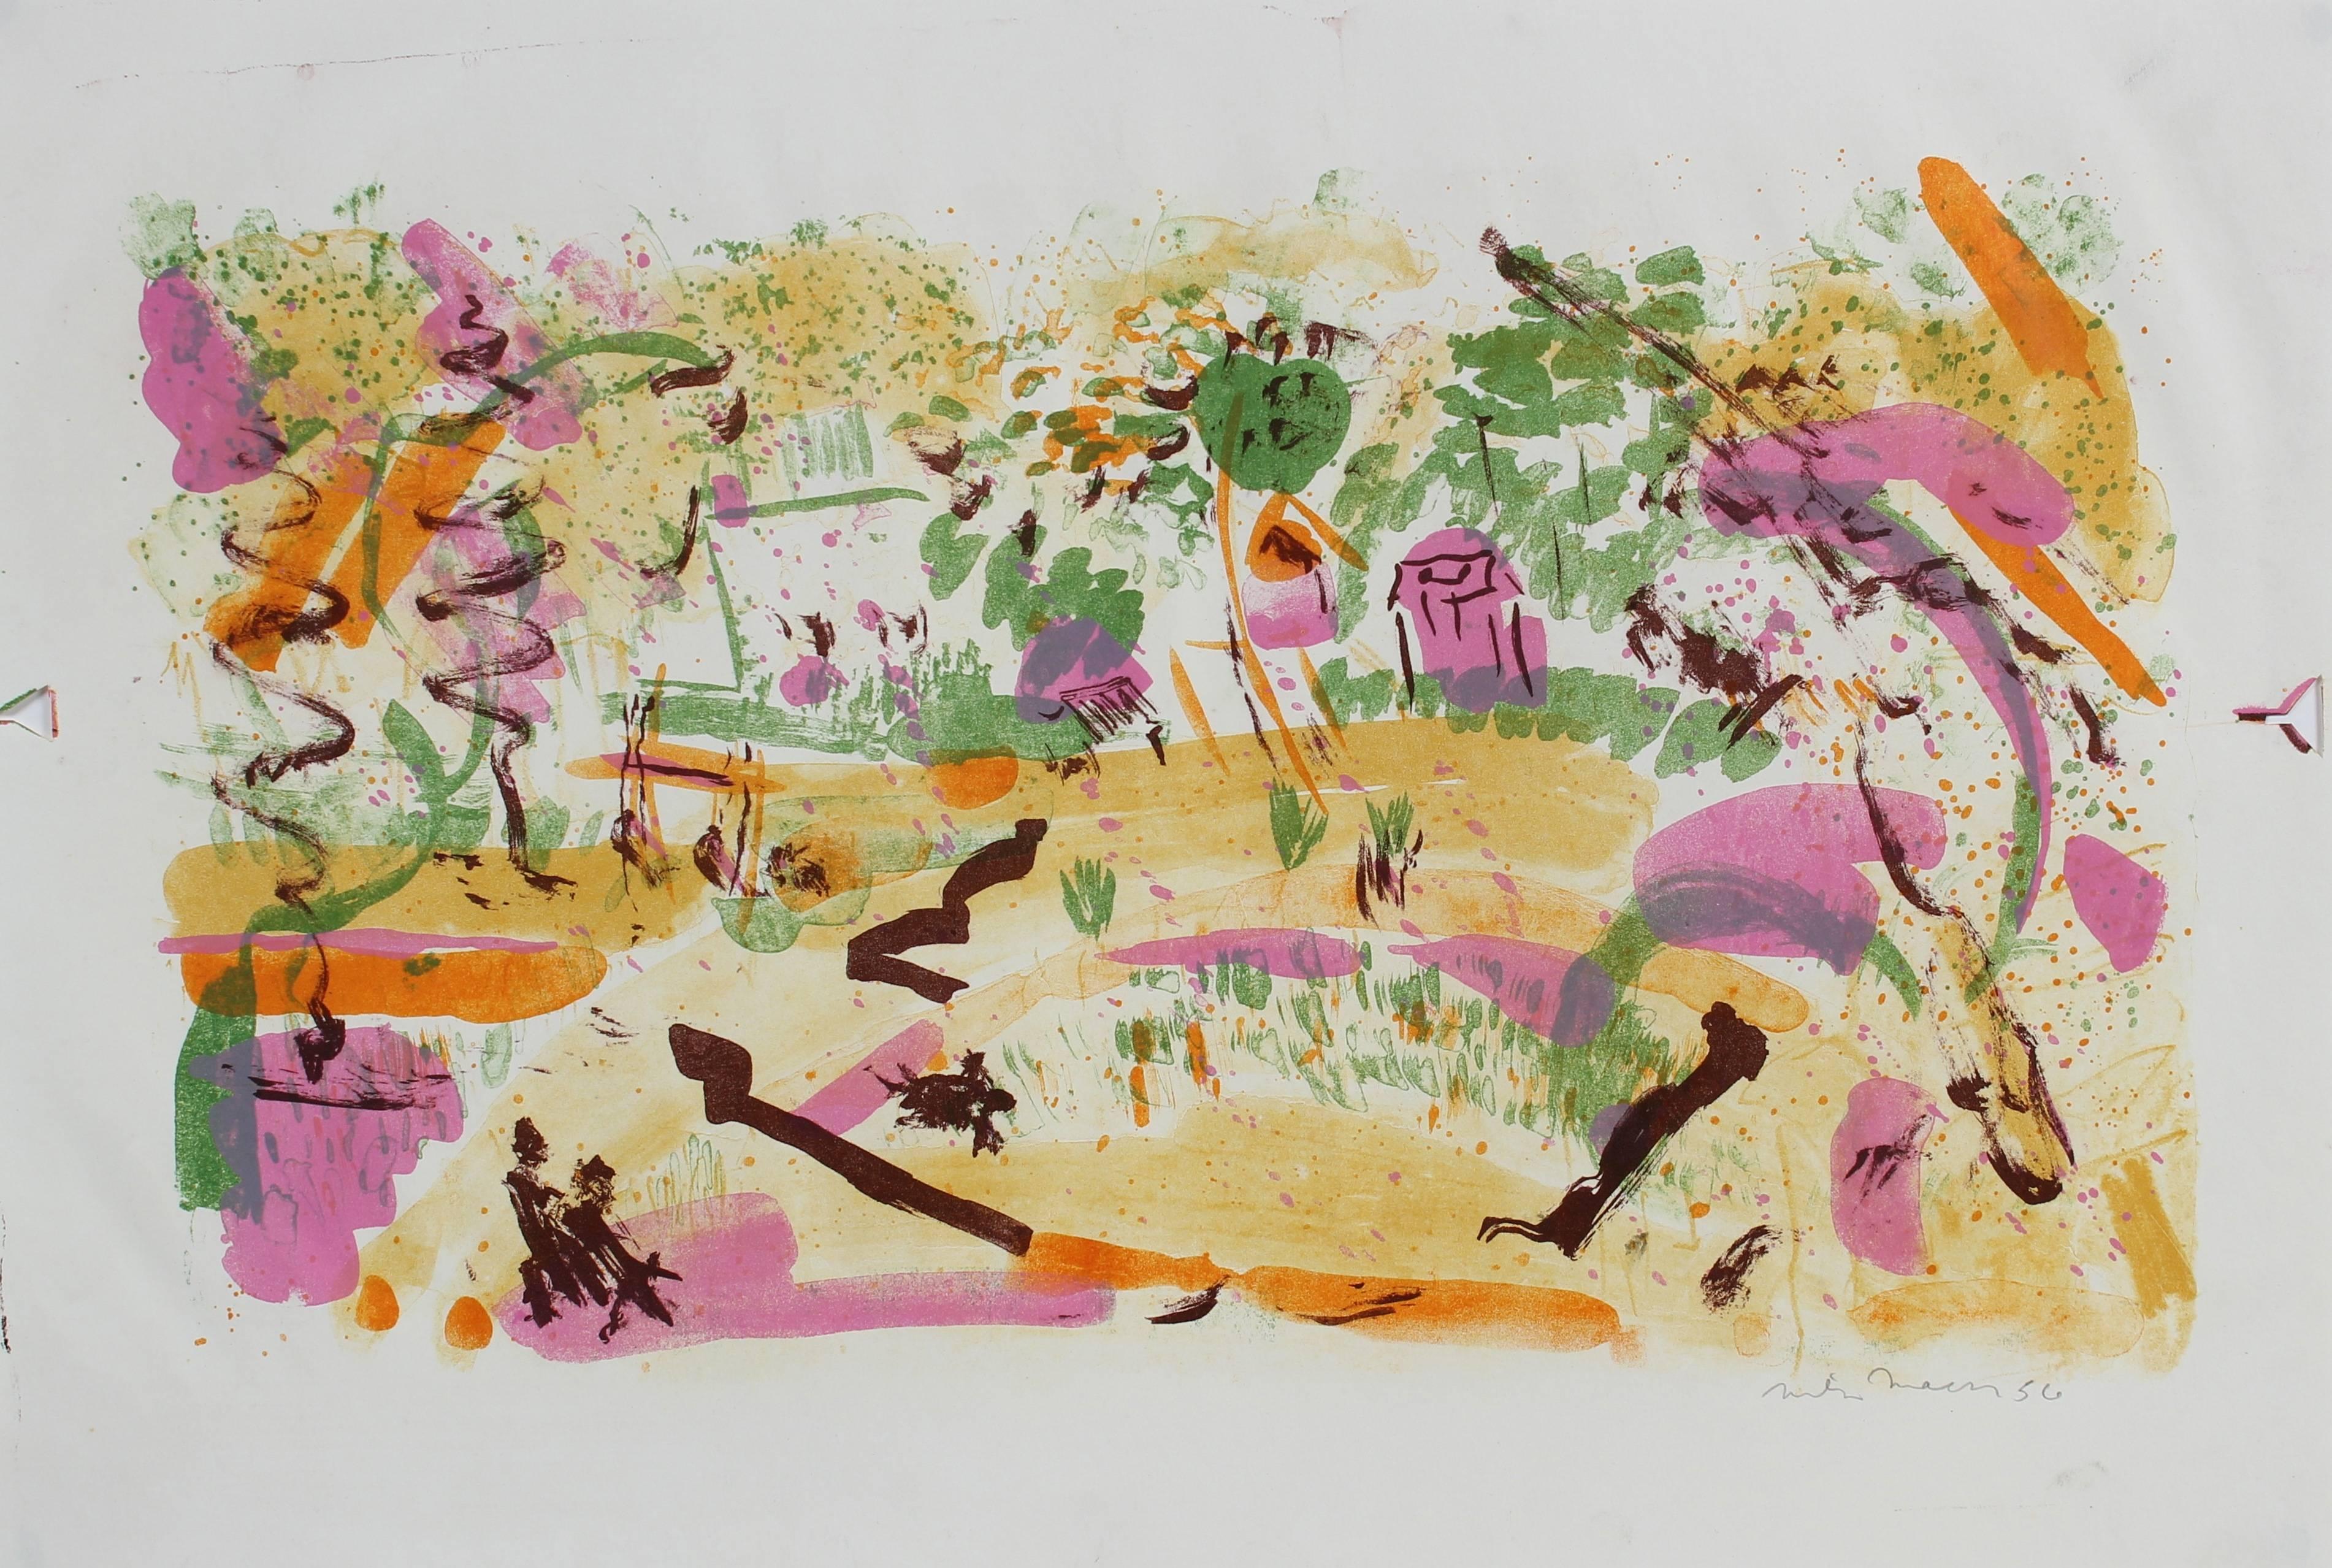 Bright Abstracted Springtime Landscape Lithograph, 1956 - Print by Michael L. Mason